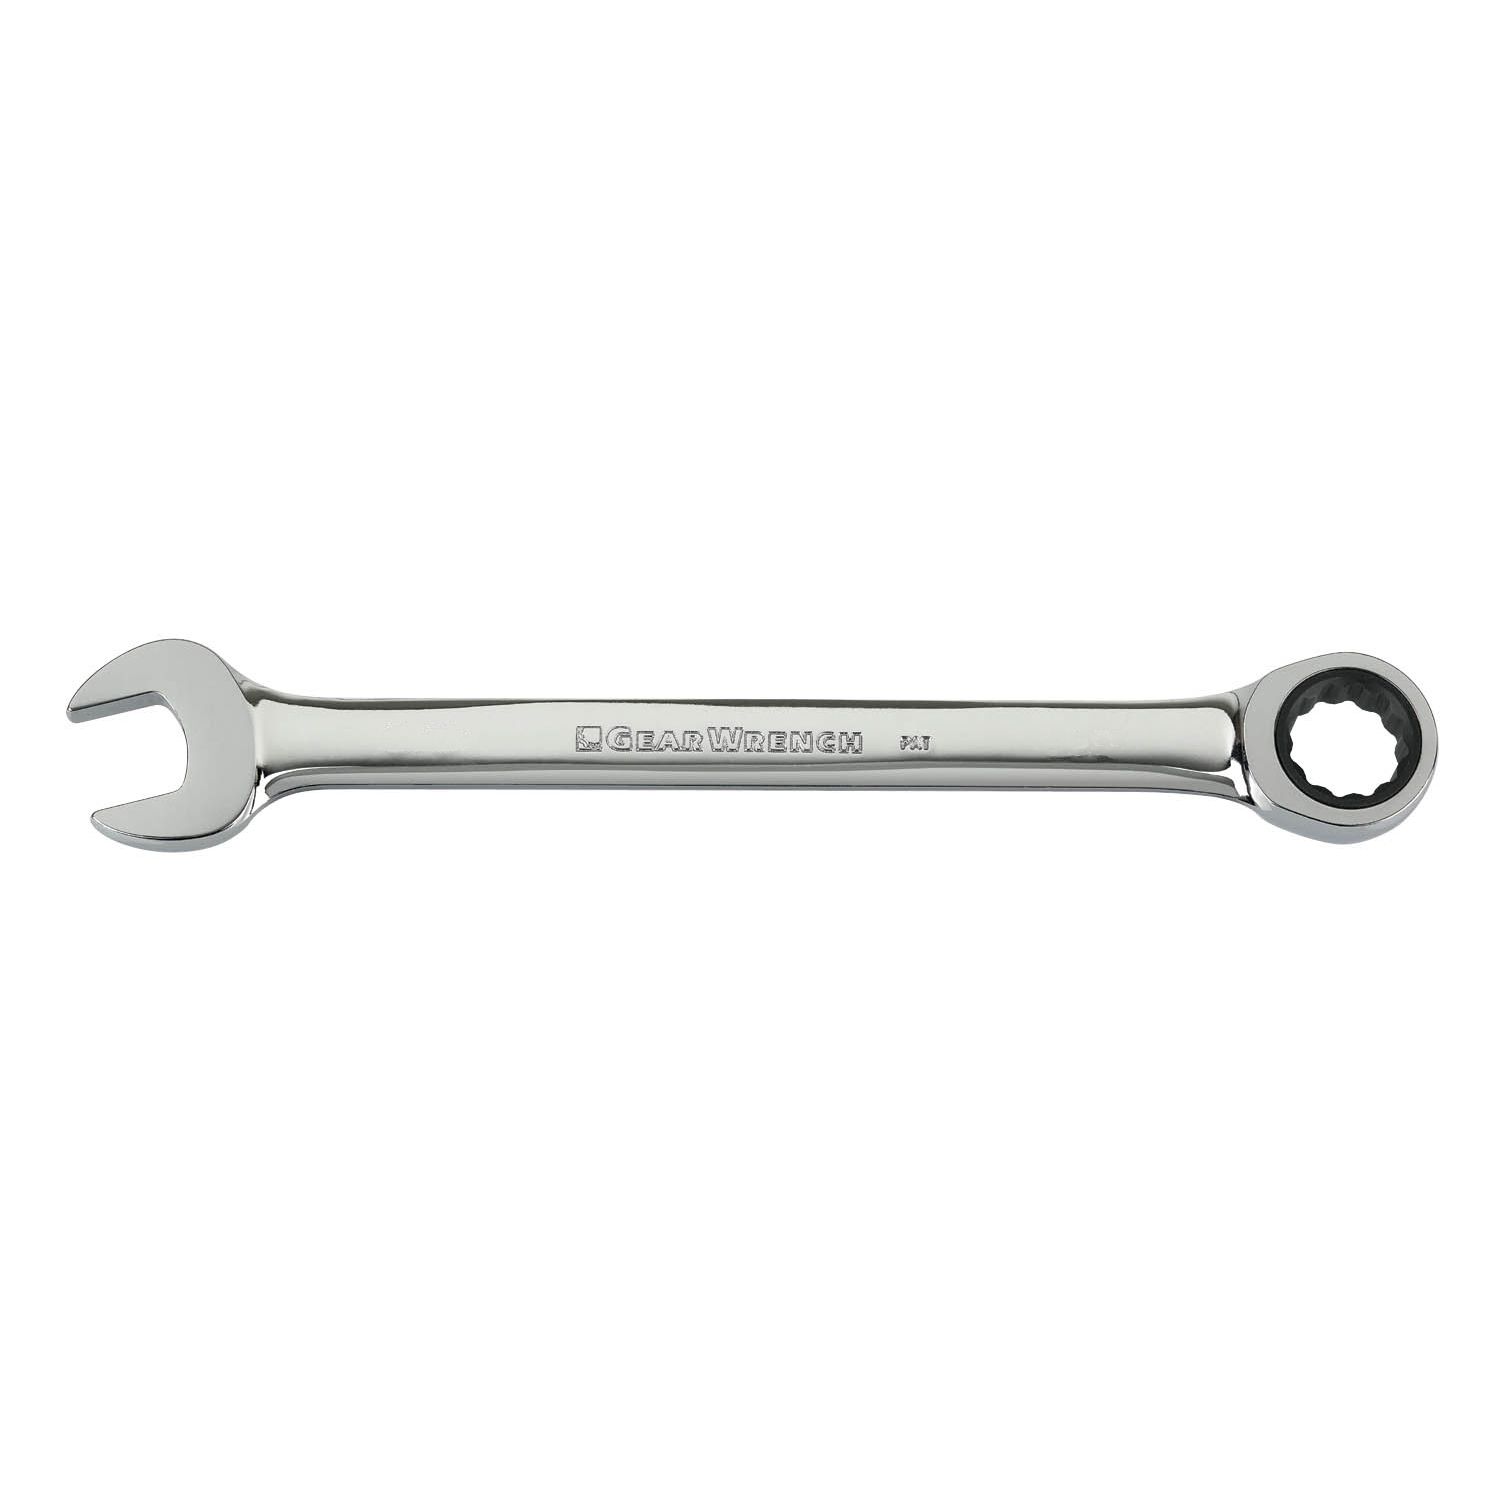 13mm Williams 11513 12 Point Combination Wrench Satin Chrome Finish 